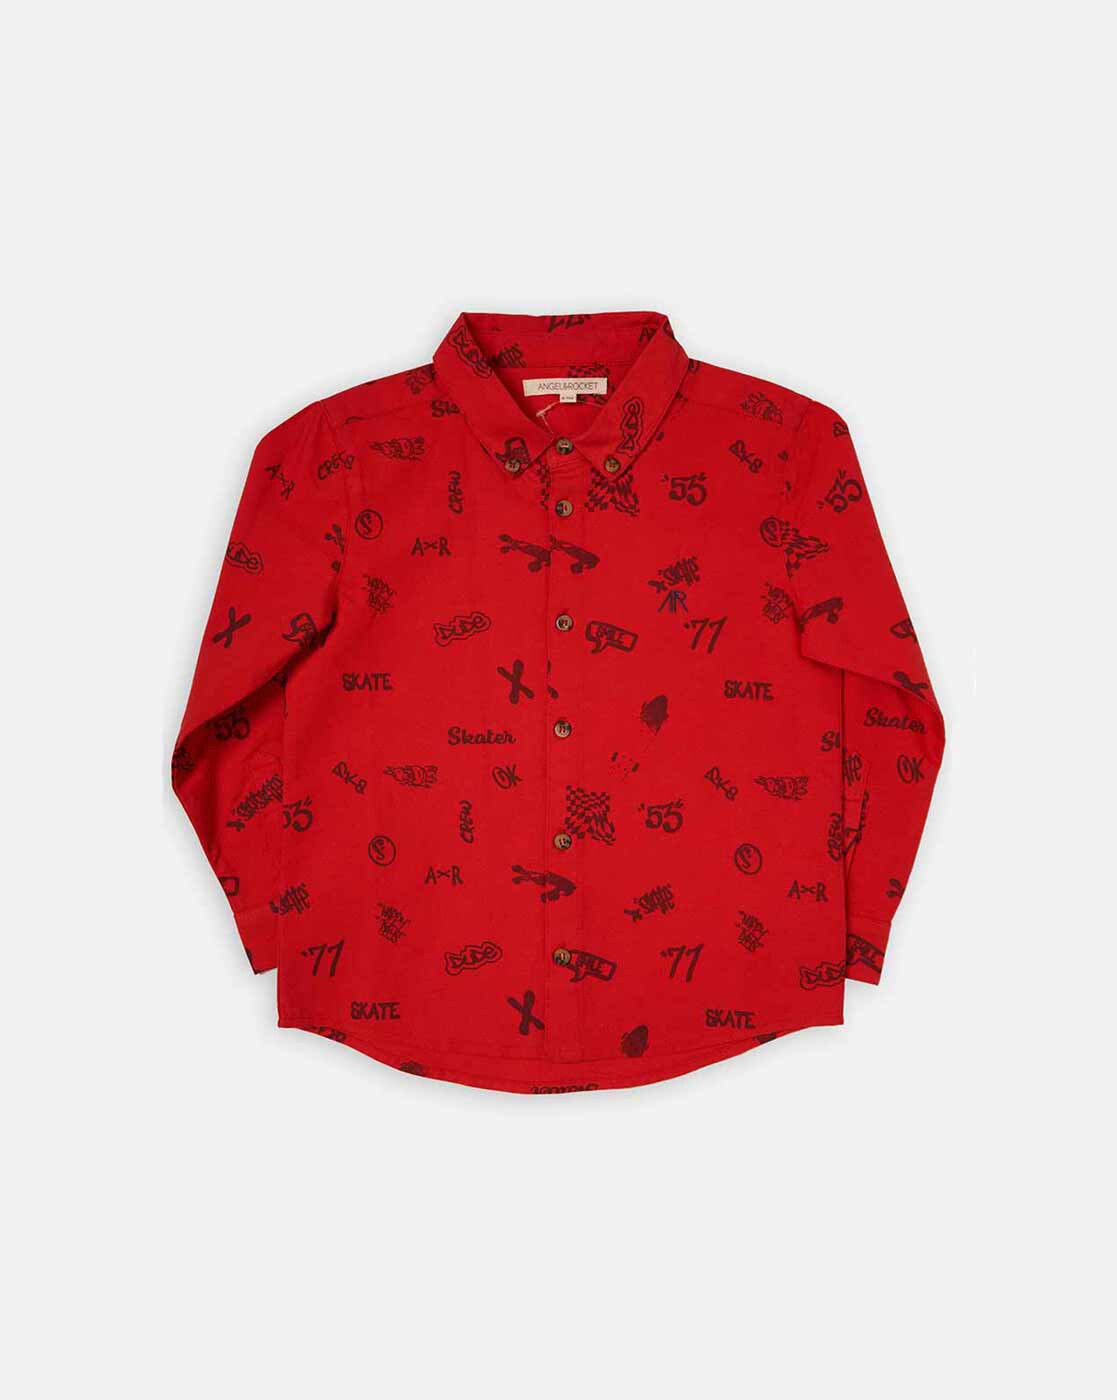 Boys Skater Printed Full Sleeves Cotton Red Smart Shirt 12 Years